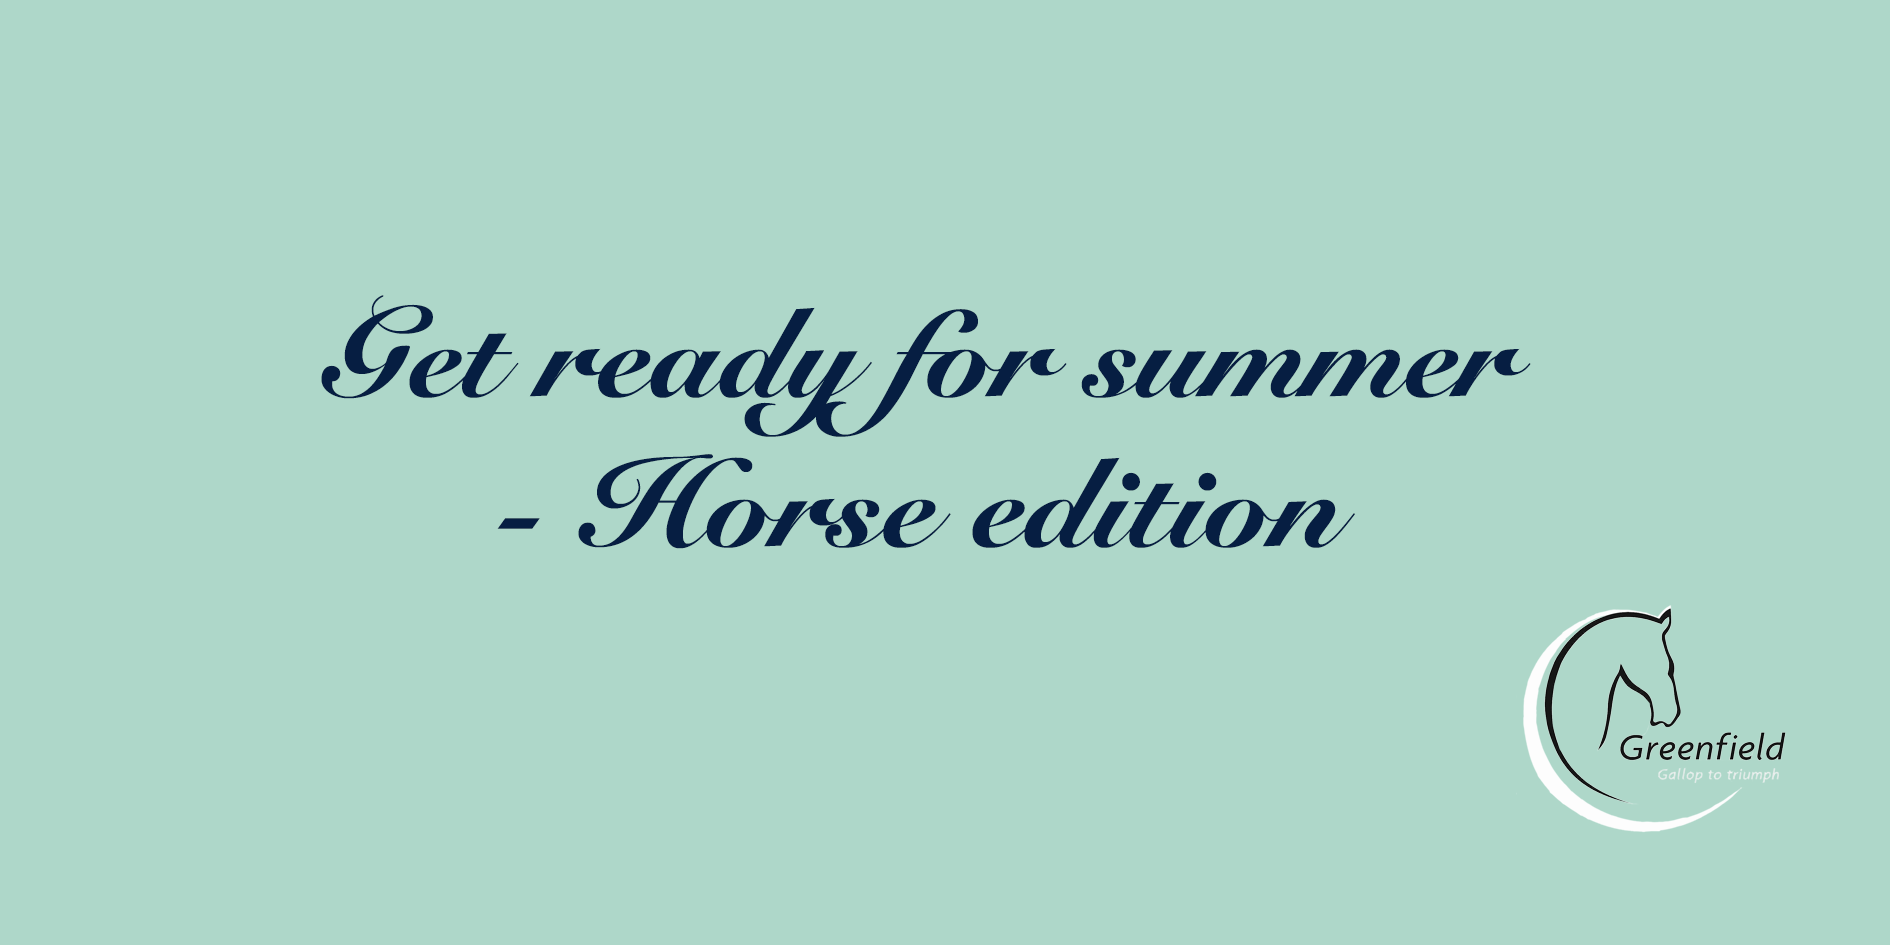 Get ready for summer - Horse edition